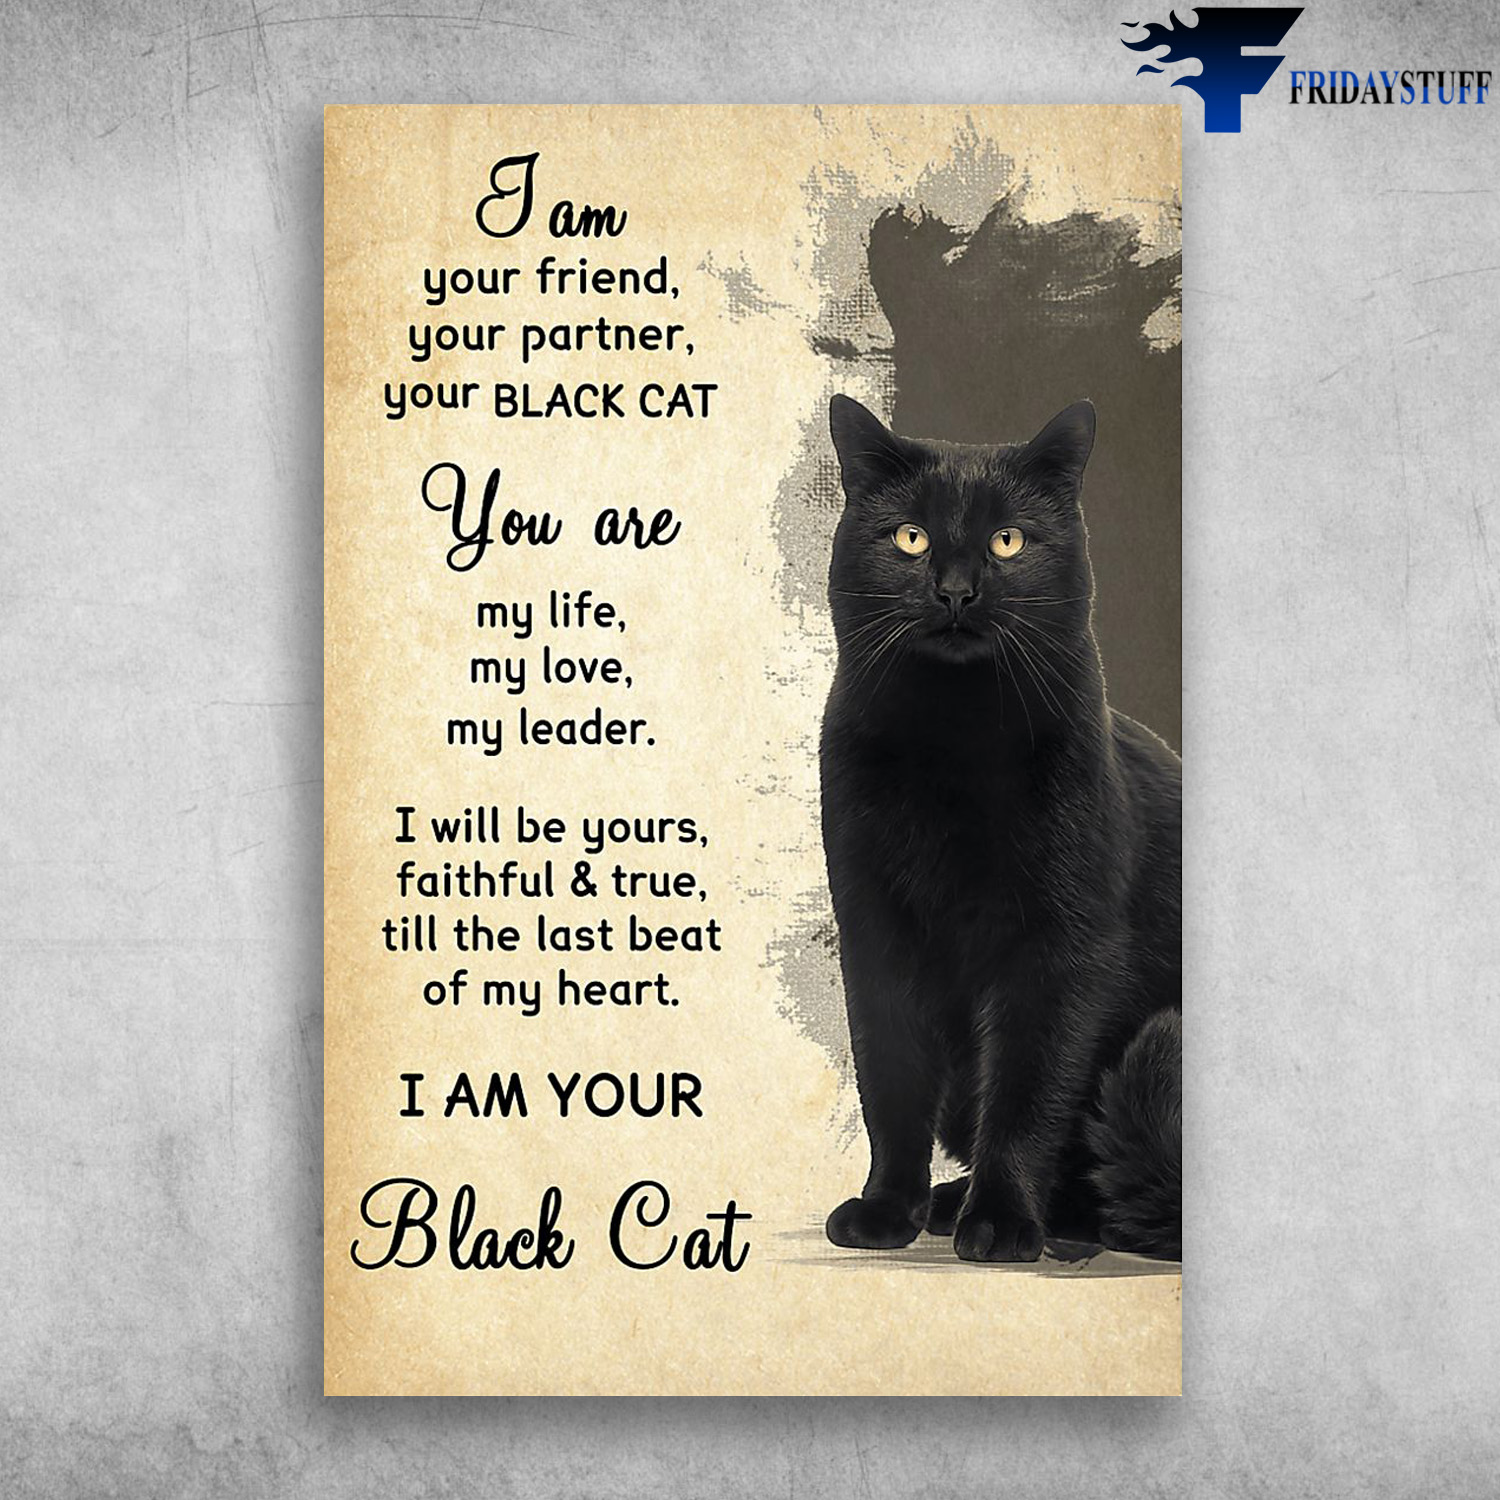 The Black Cat - I Am Your Friend, Your Partner, Your Black Cat, You Are My Life, My Love, My Leader, I Will Be Yours, Faithful And True, Till The Last Beat Of My Heart, I Am Your Black Cat